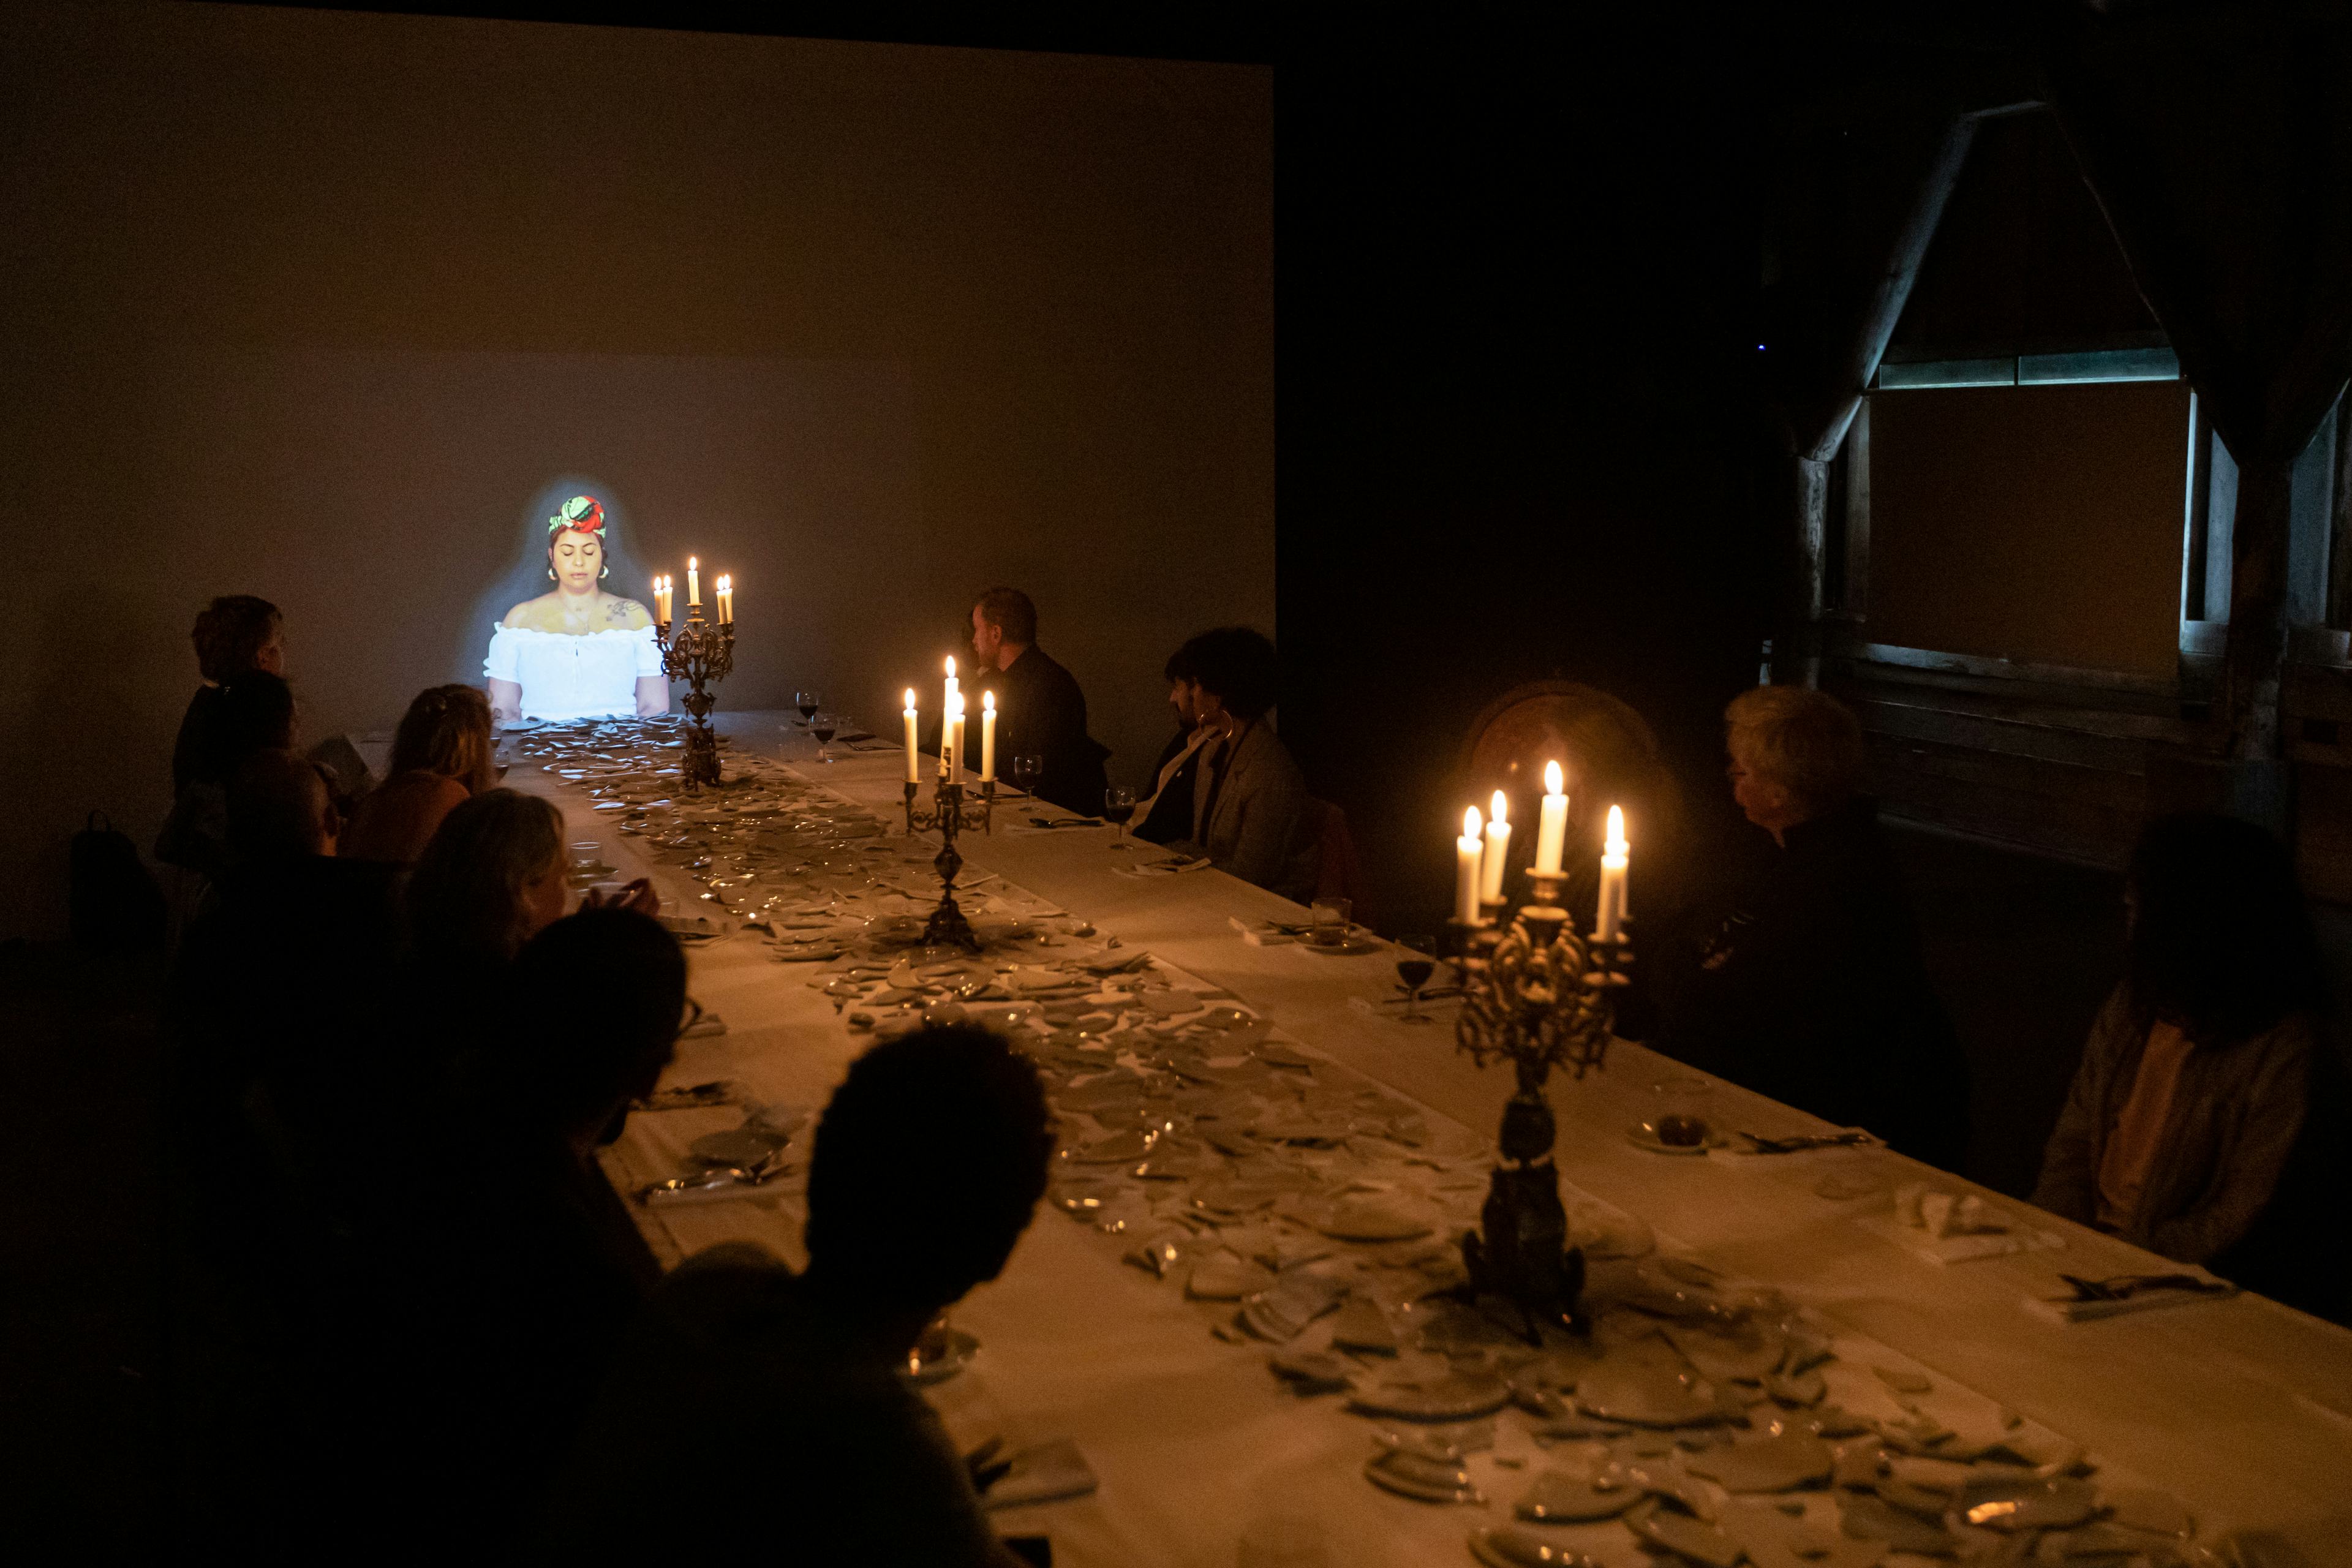 People sitting at a long table in a dark room